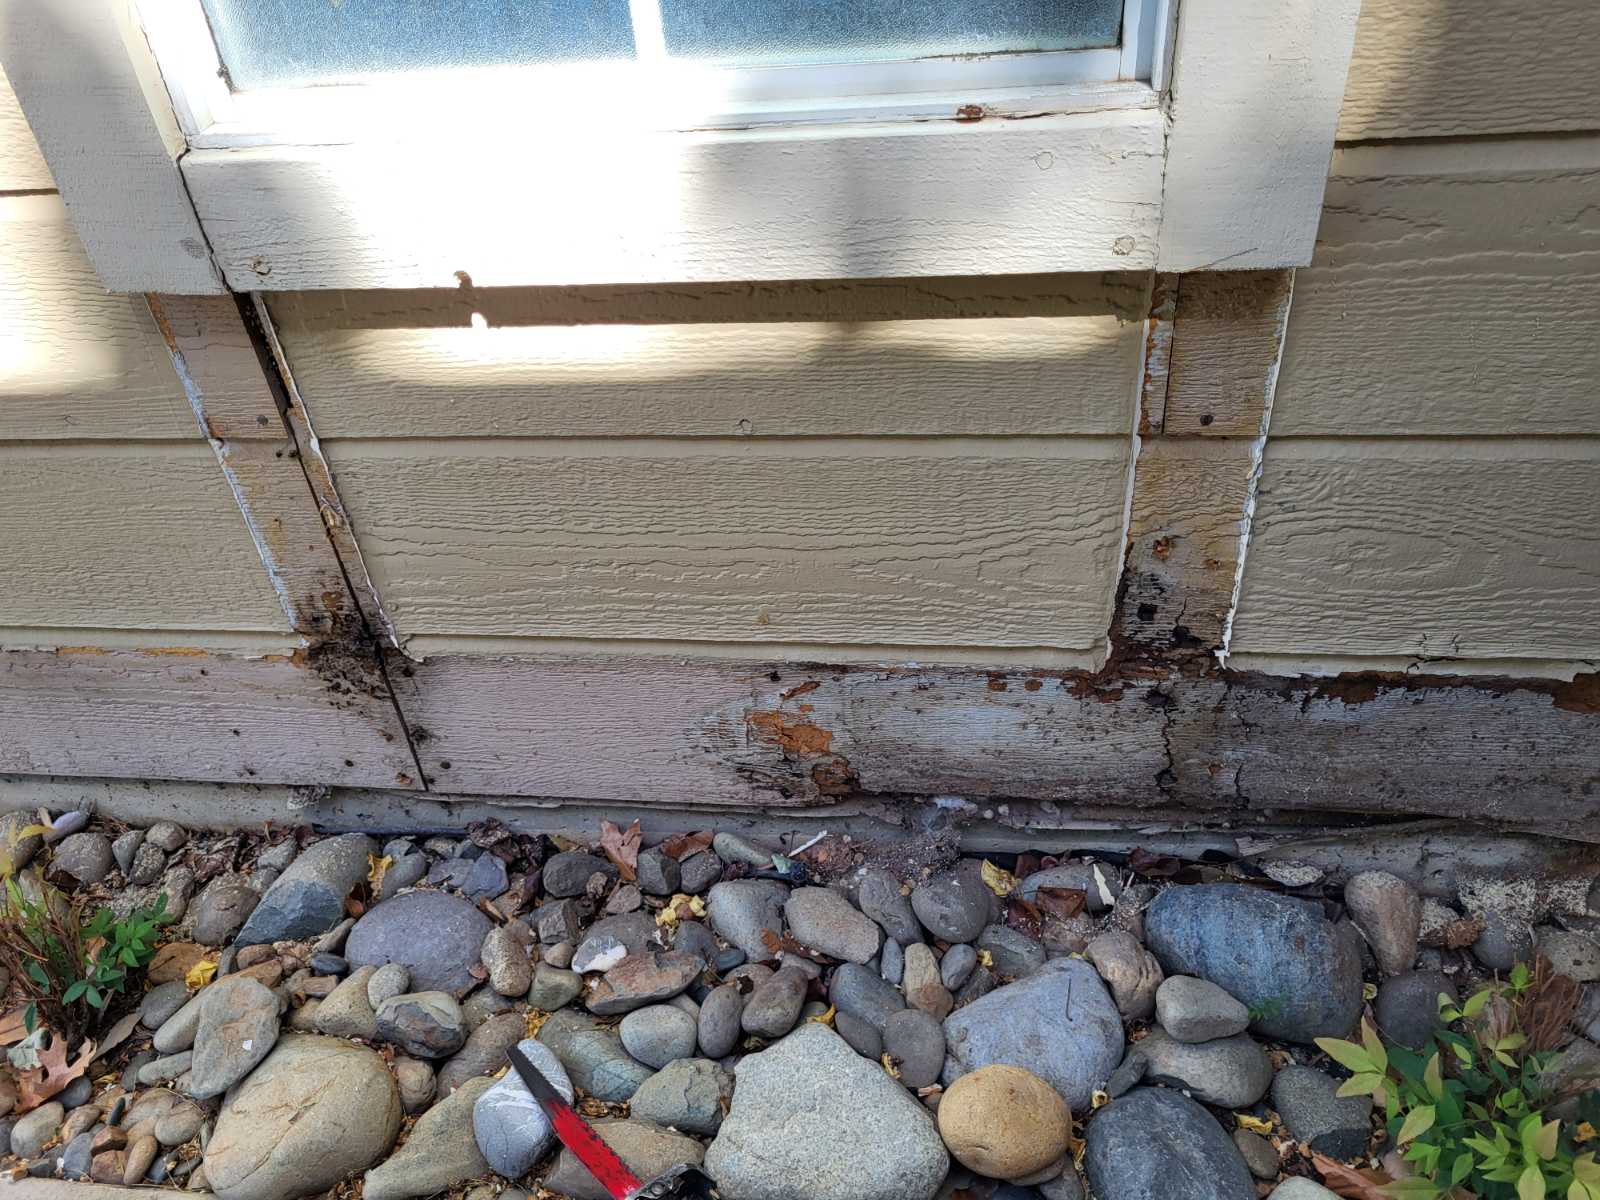 t1-11 siding damaged by dry rot, bottom exterior of the home